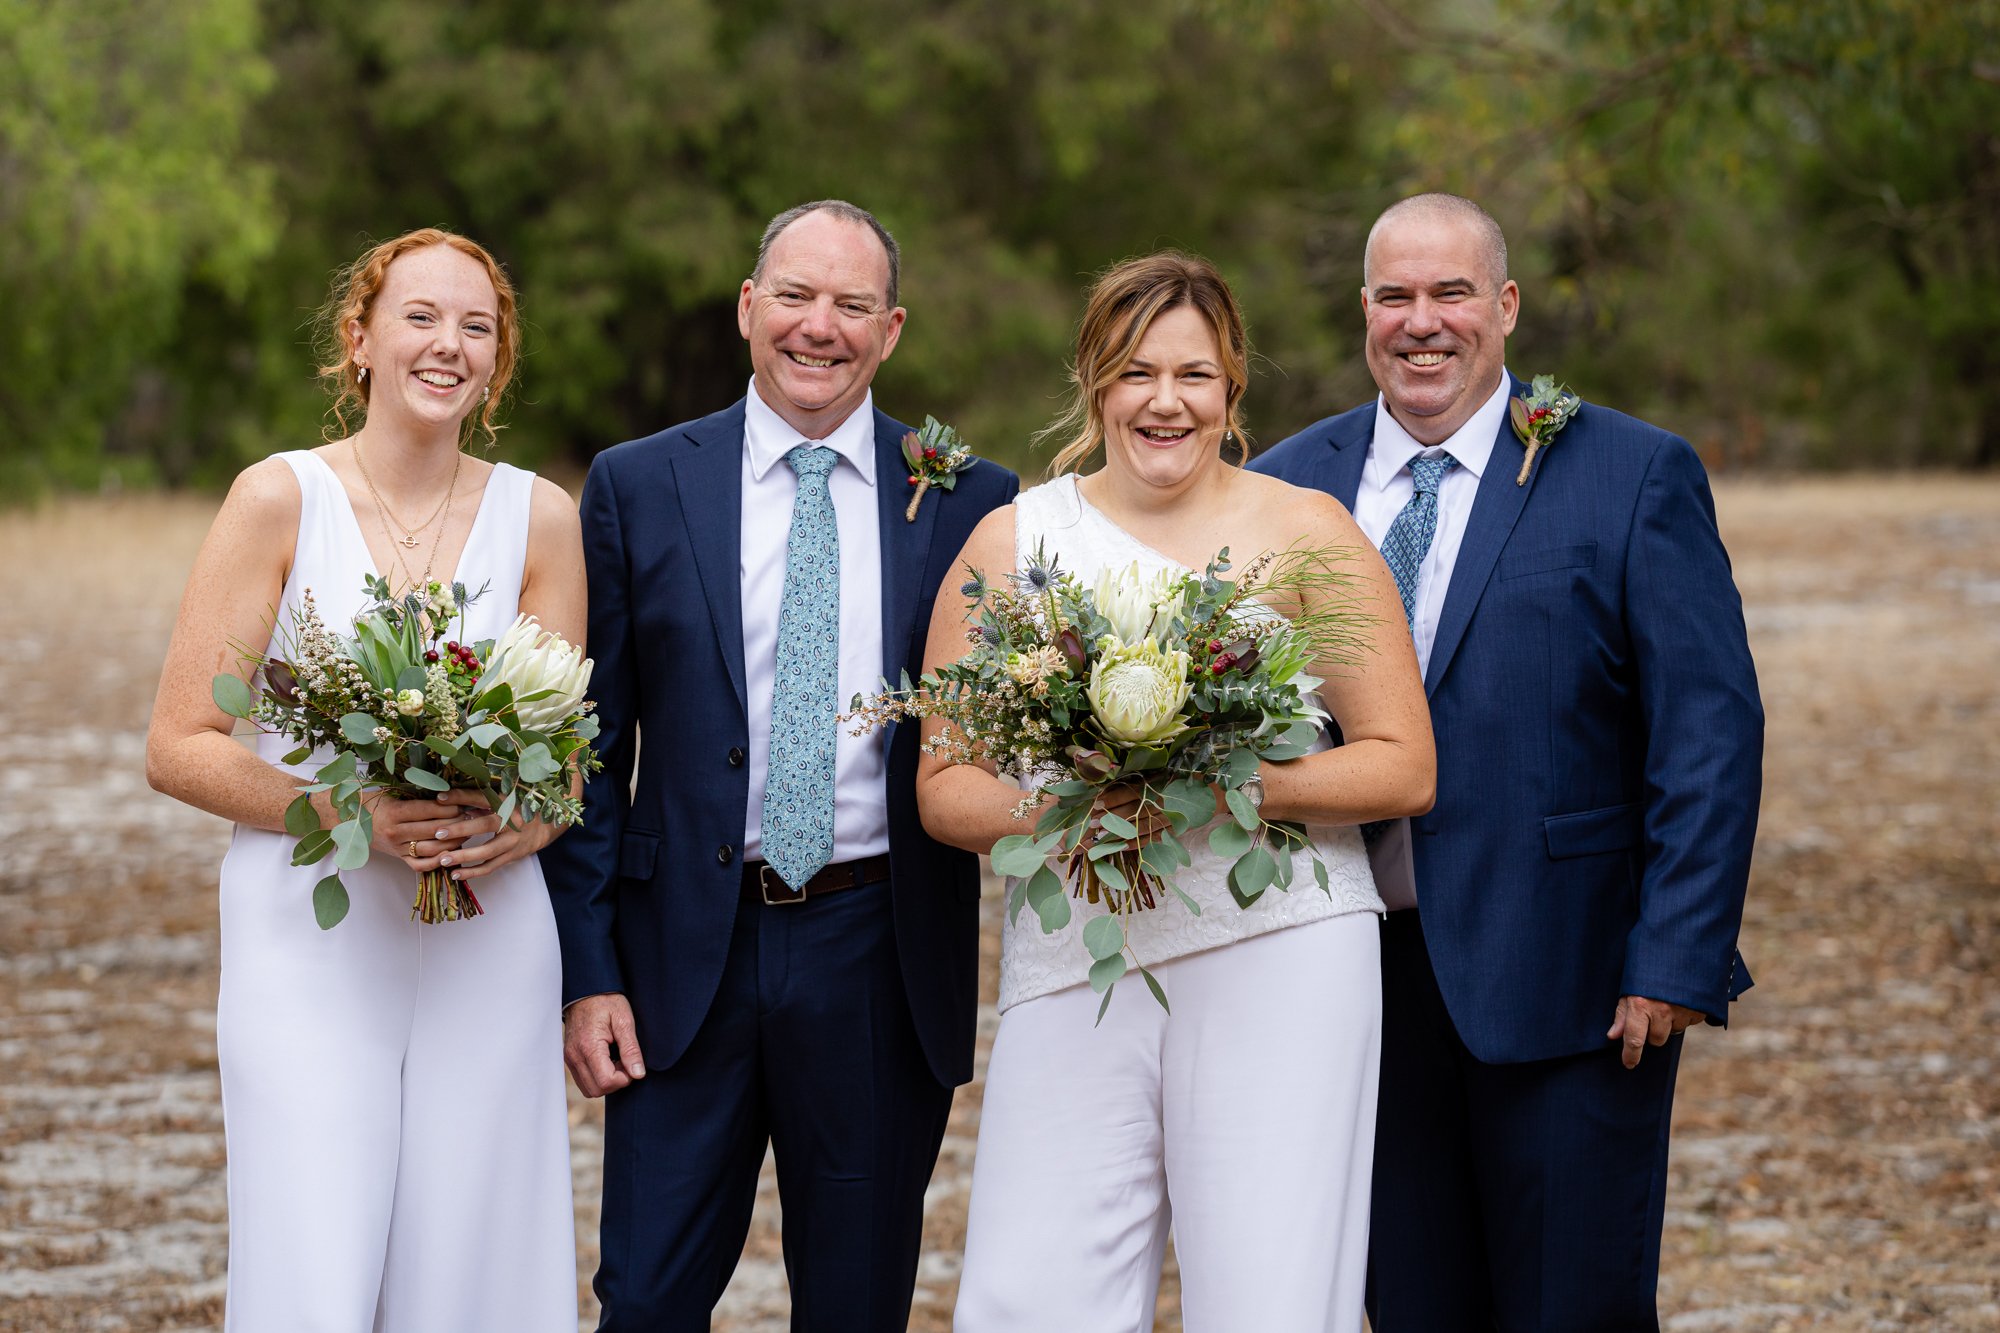 Two guys and two ladies in wedding photo holding a bouquet